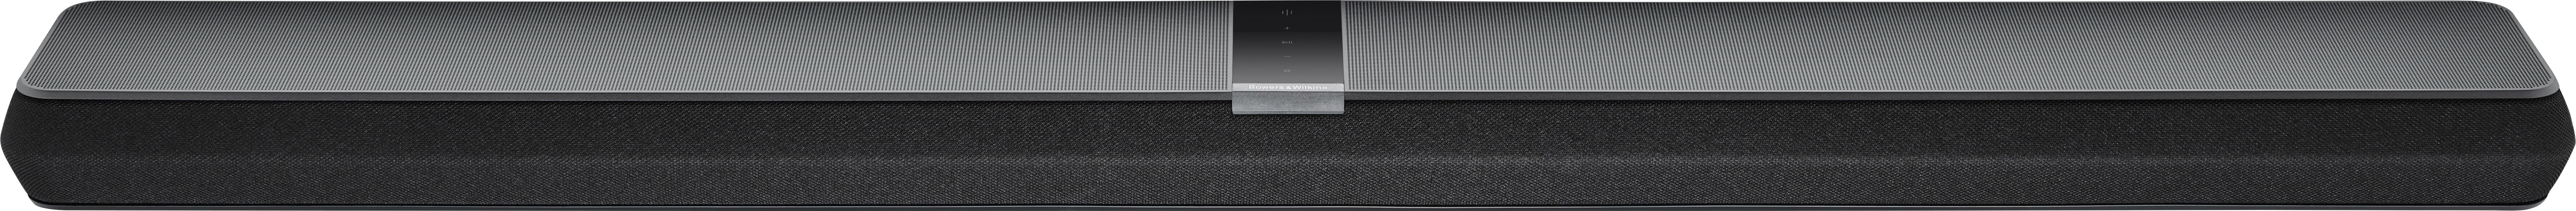 Angle View: Bowers & Wilkins - Panorama 3 Atmos Soundbar with Built-In Subwoofer - Black